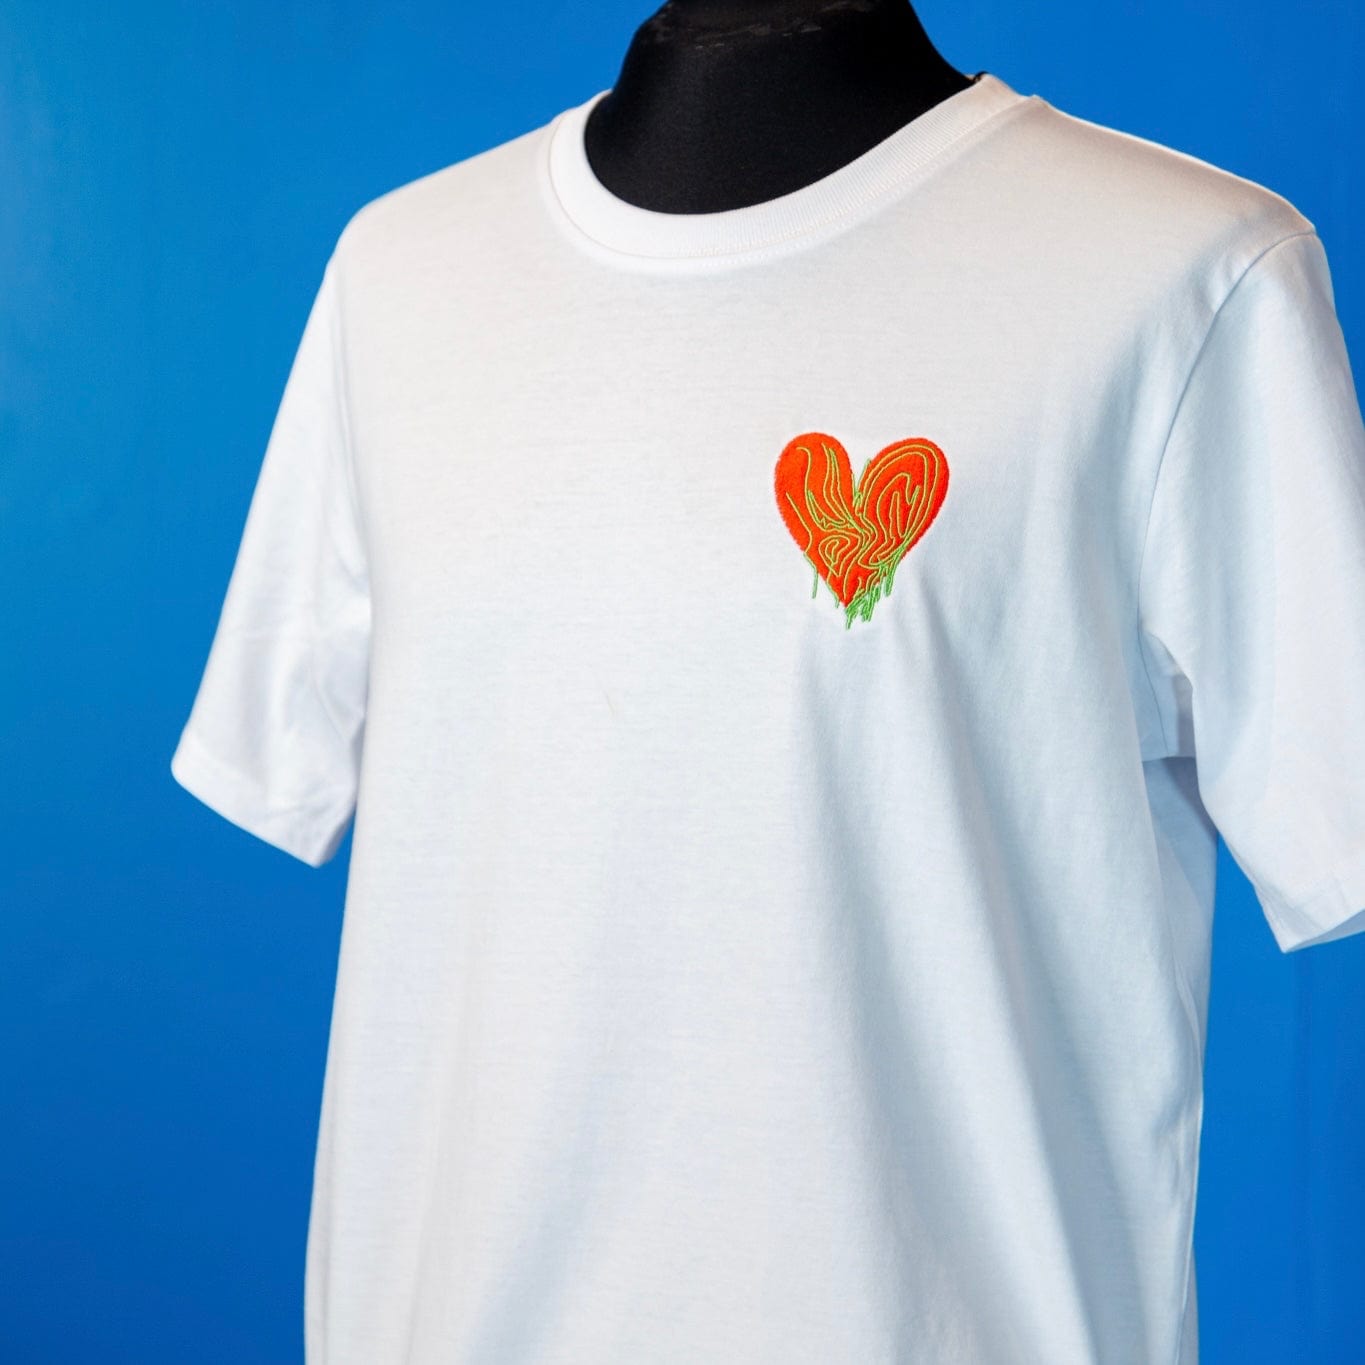 Nicole Chui x Migration Museum Embroidered Heart Organic T-shirt - White